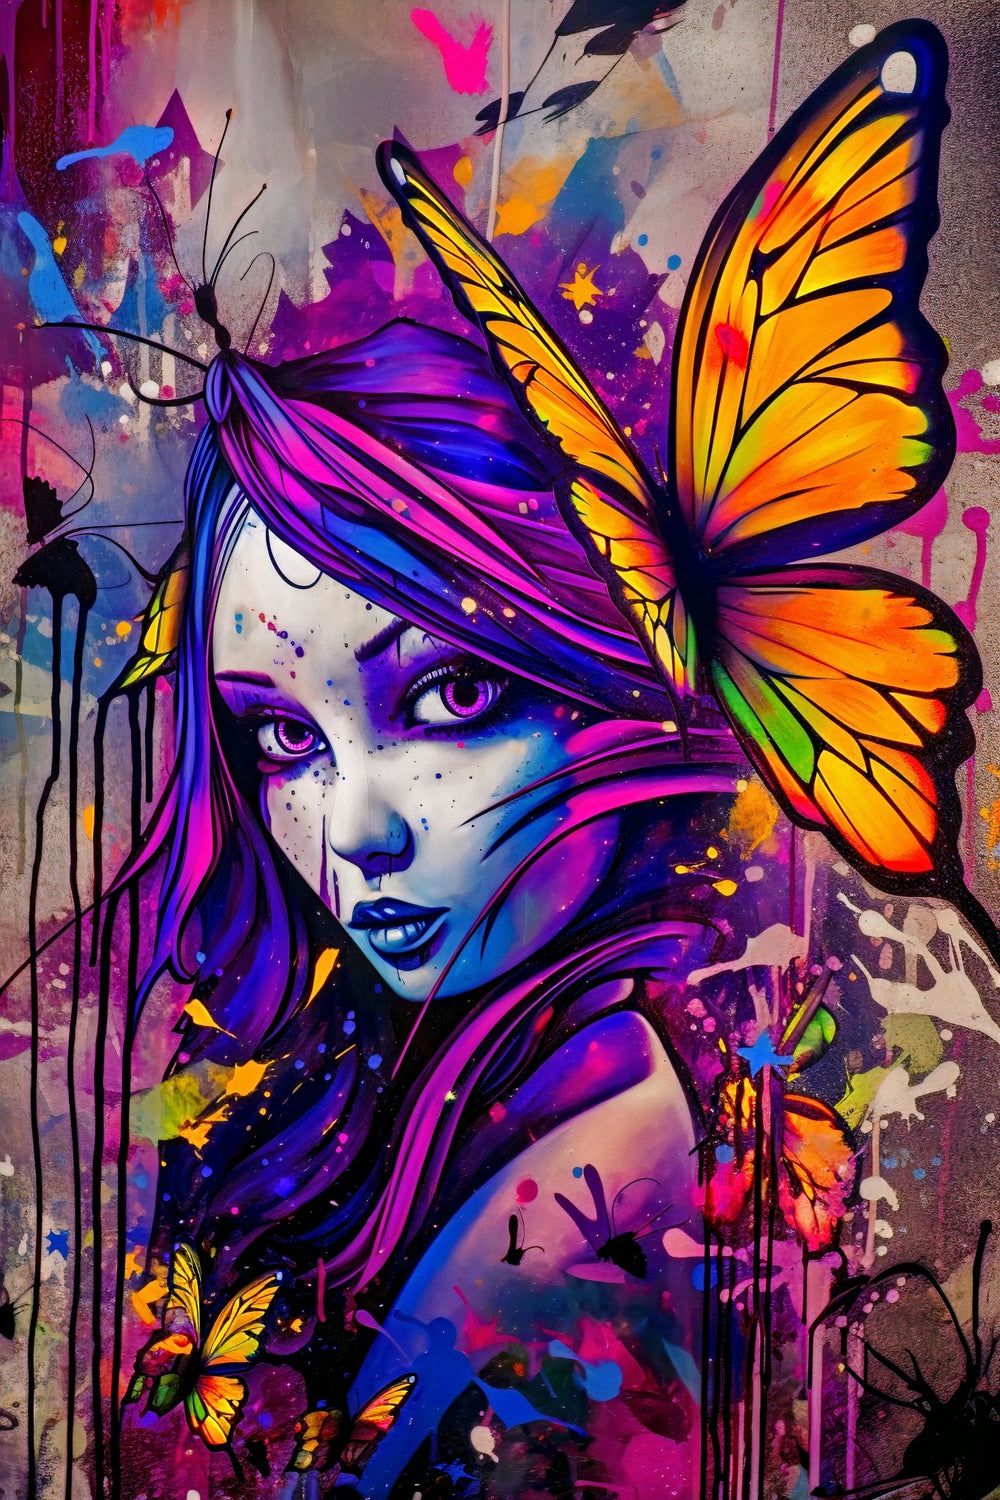 A girl with butterfly wings in graffiti style - Street art